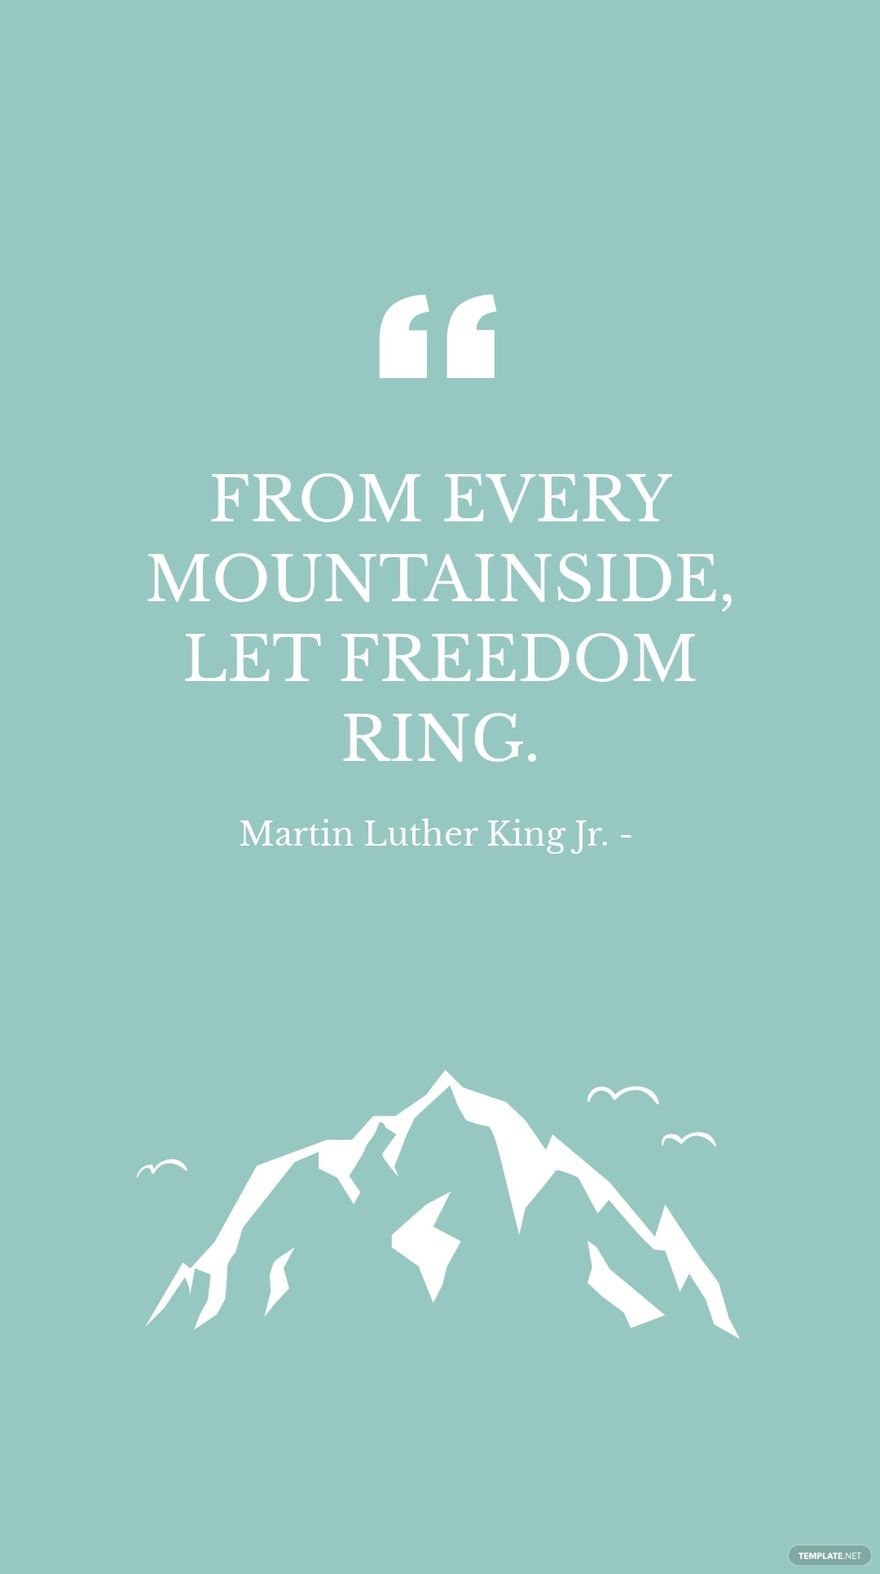 Martin Luther King Jr. - From every mountainside, let freedom ring. in JPG